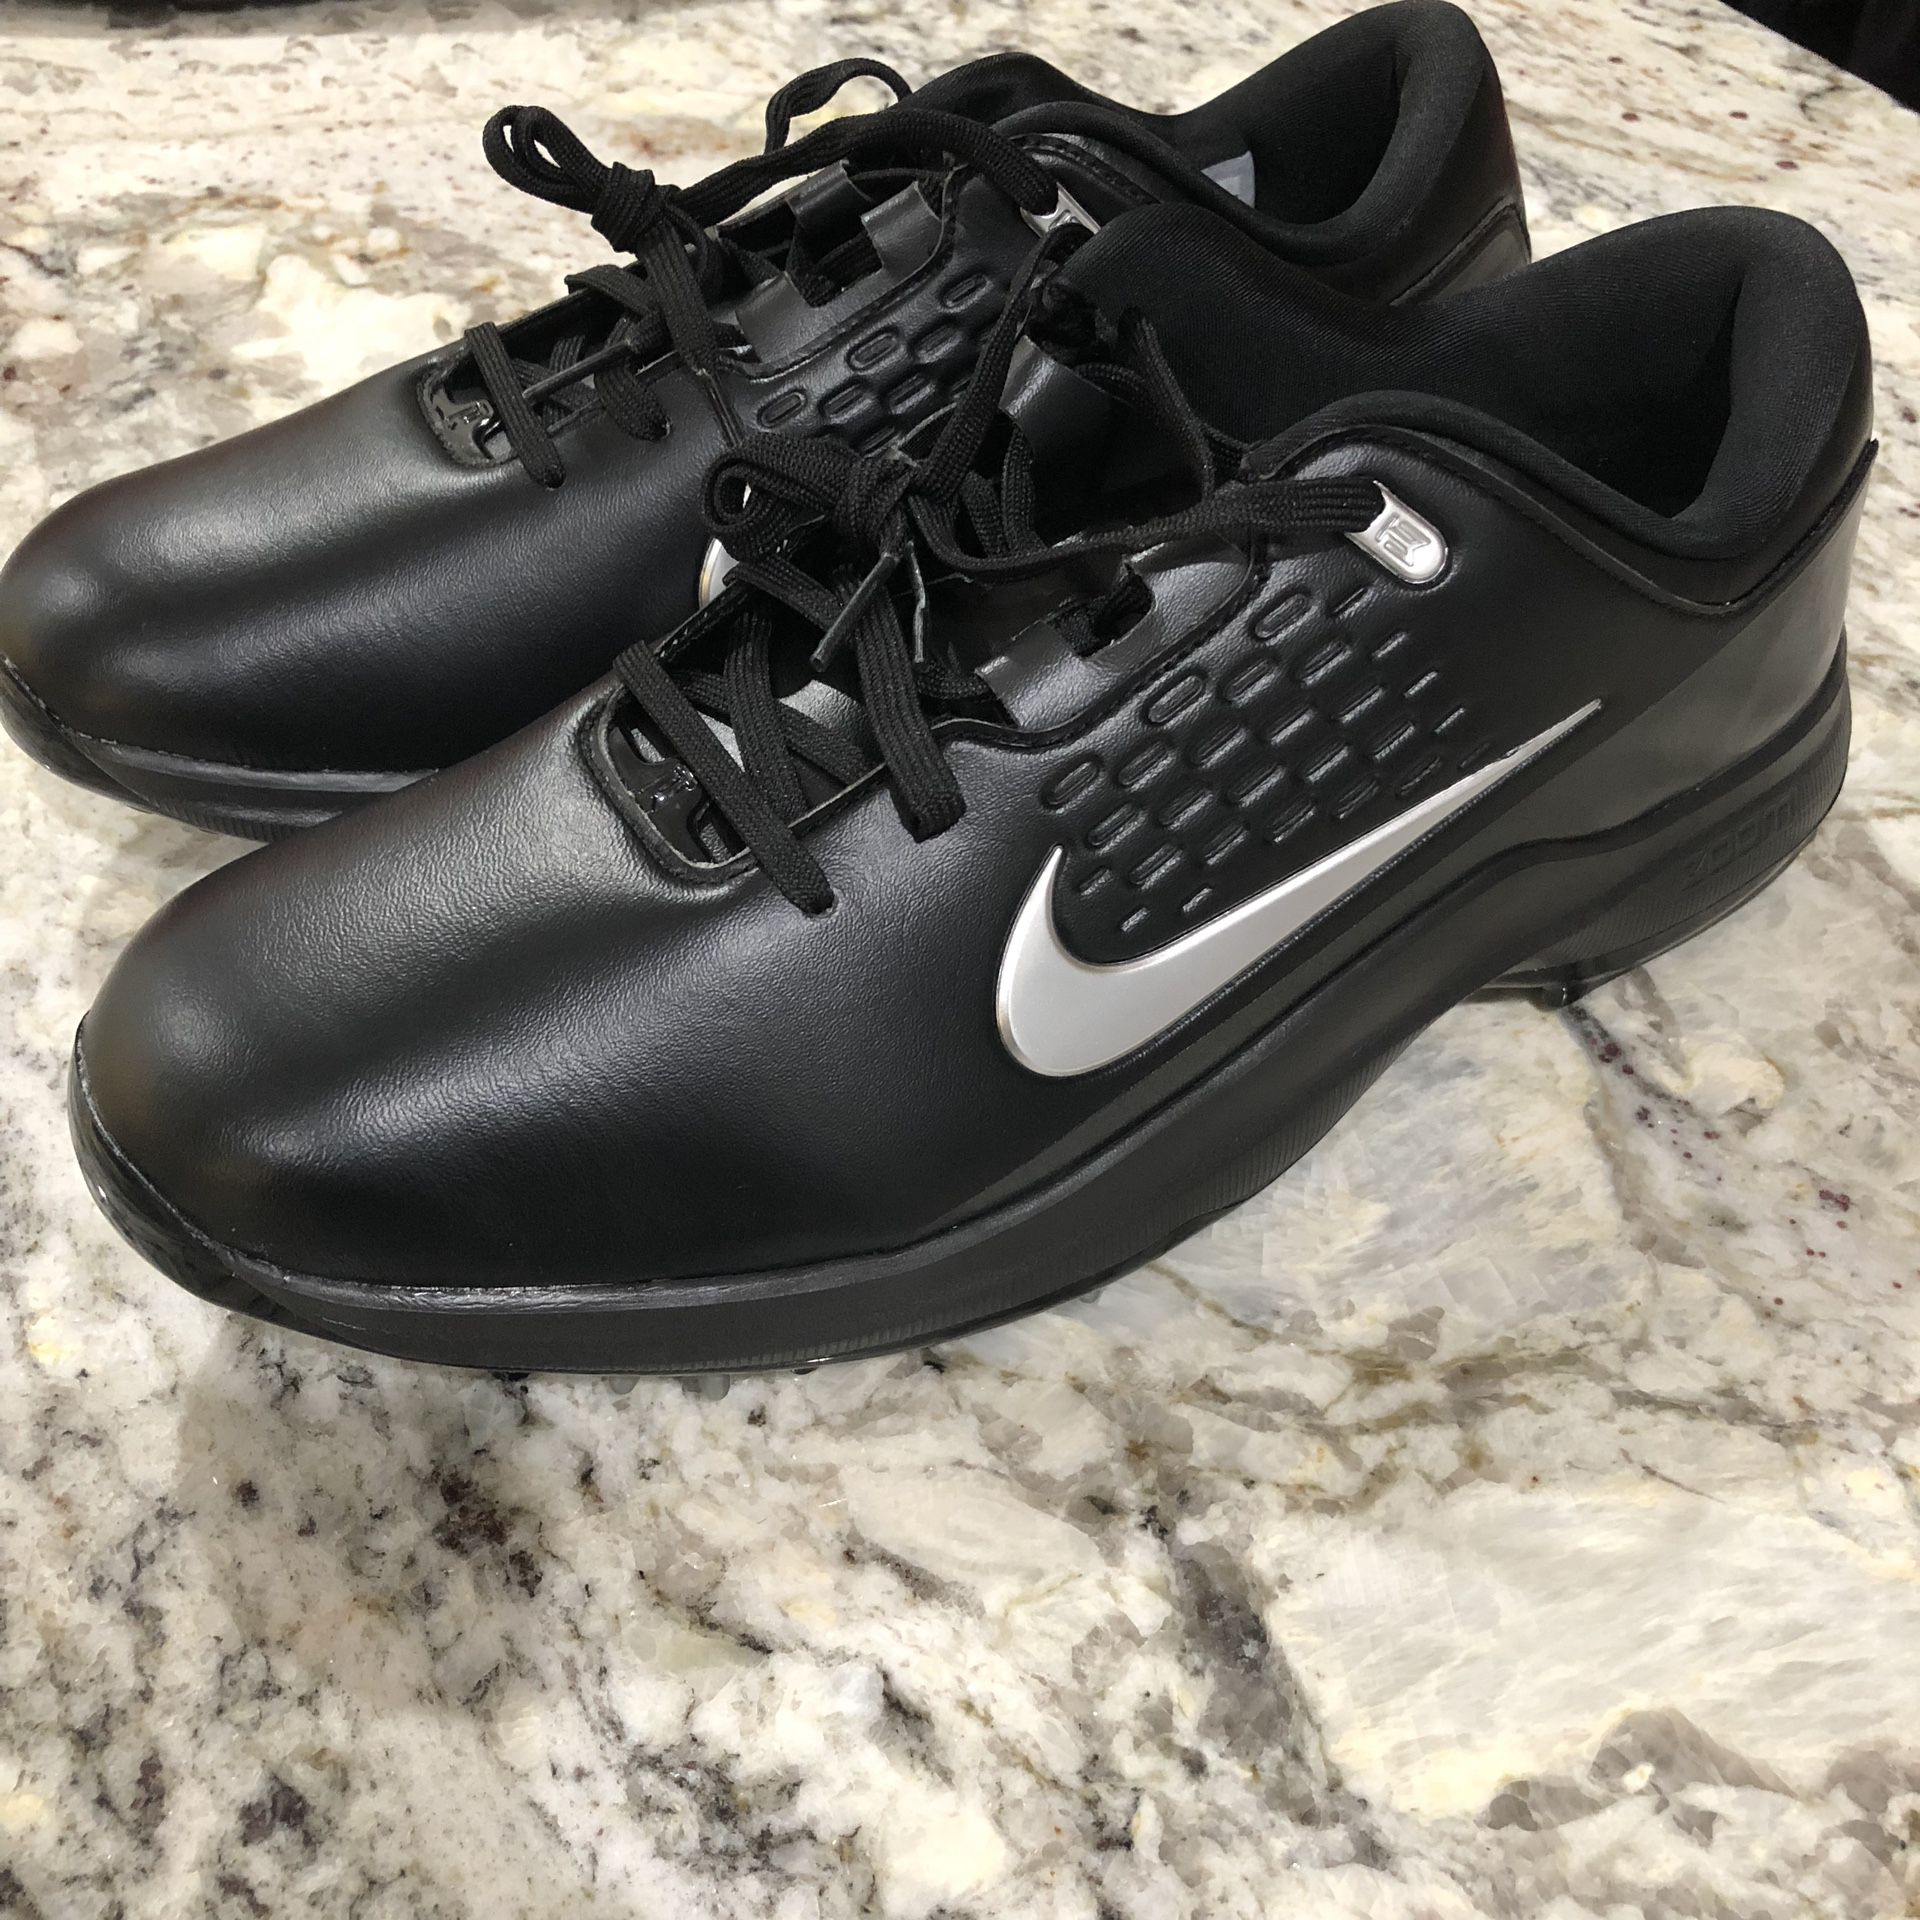 Nike Air Zoom TW71 Spiked Golf Shoes Black/Silver AA1990 002